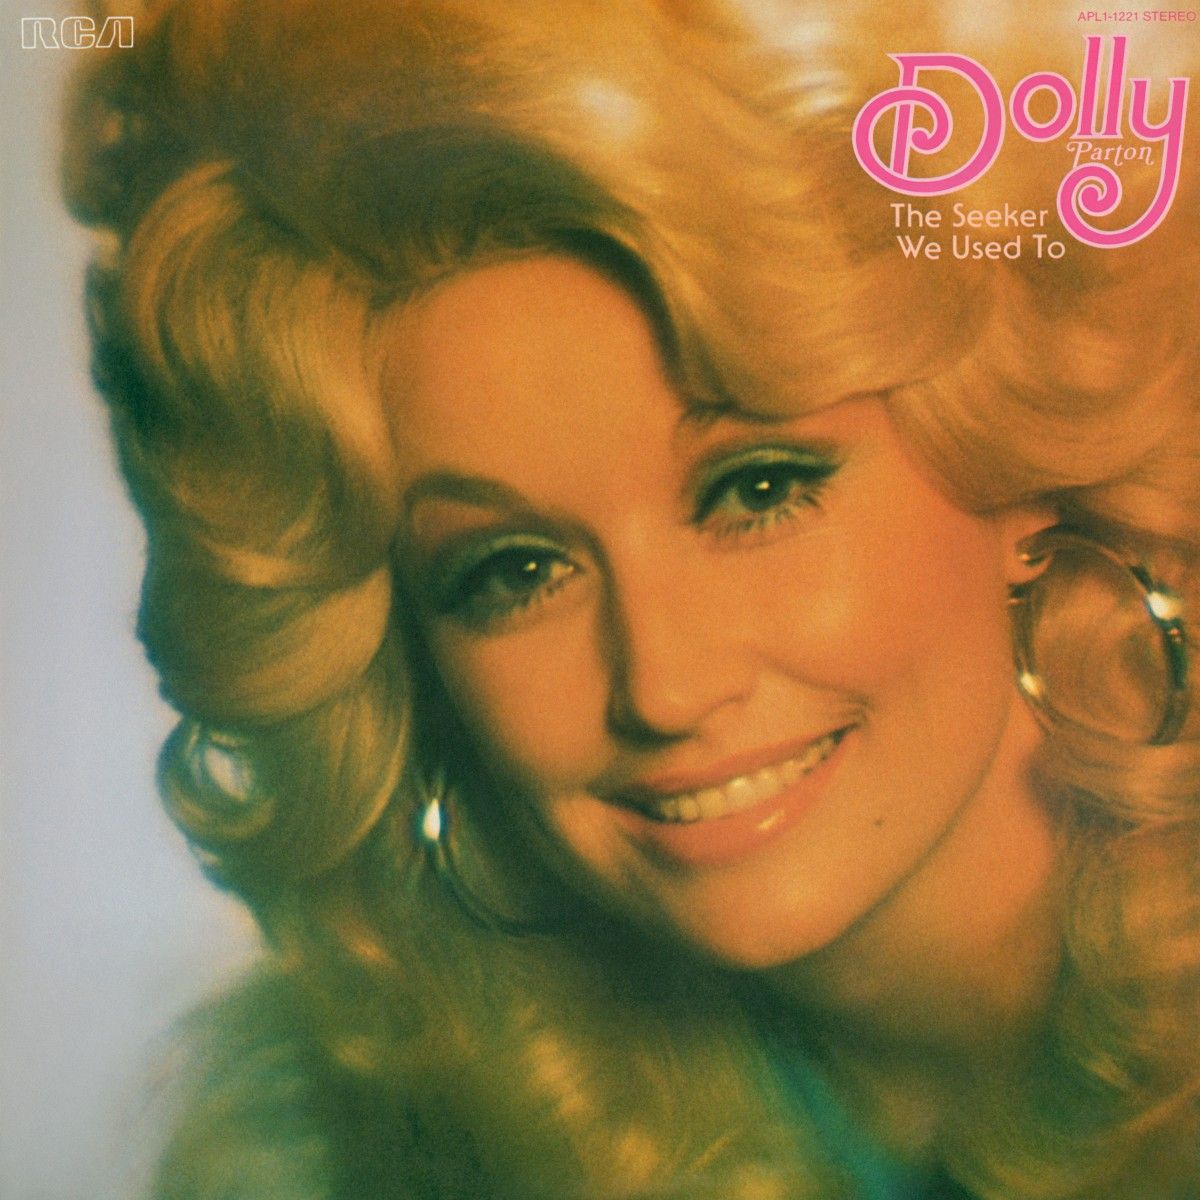 Dolly Parton - Dolly: The Seeker / We Used To Album Cover